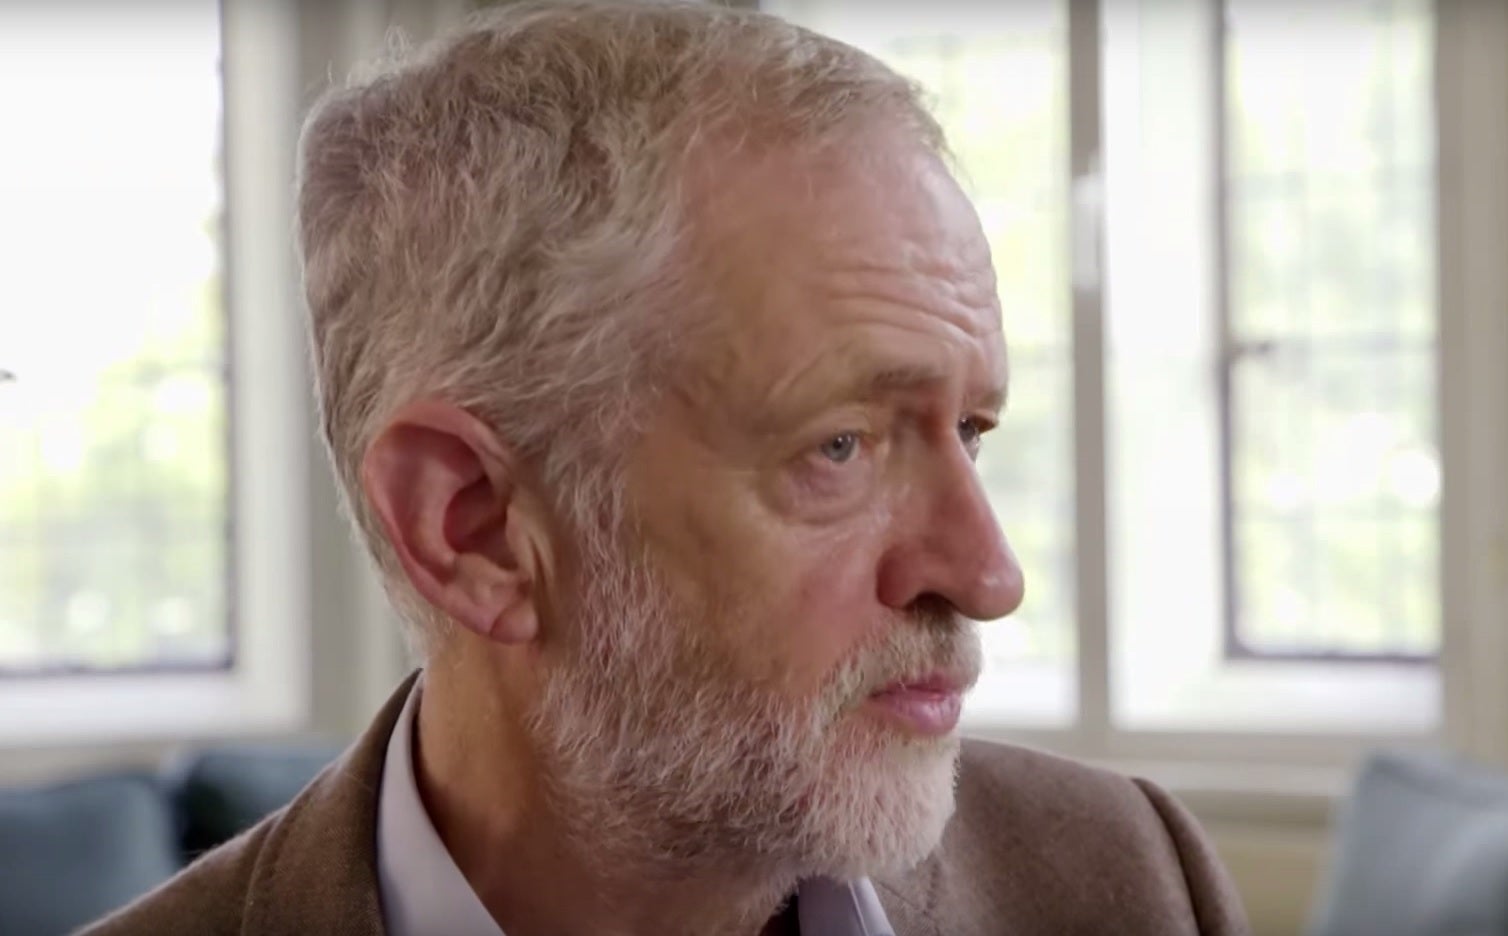 Jeremy Corbyn is the star of the video